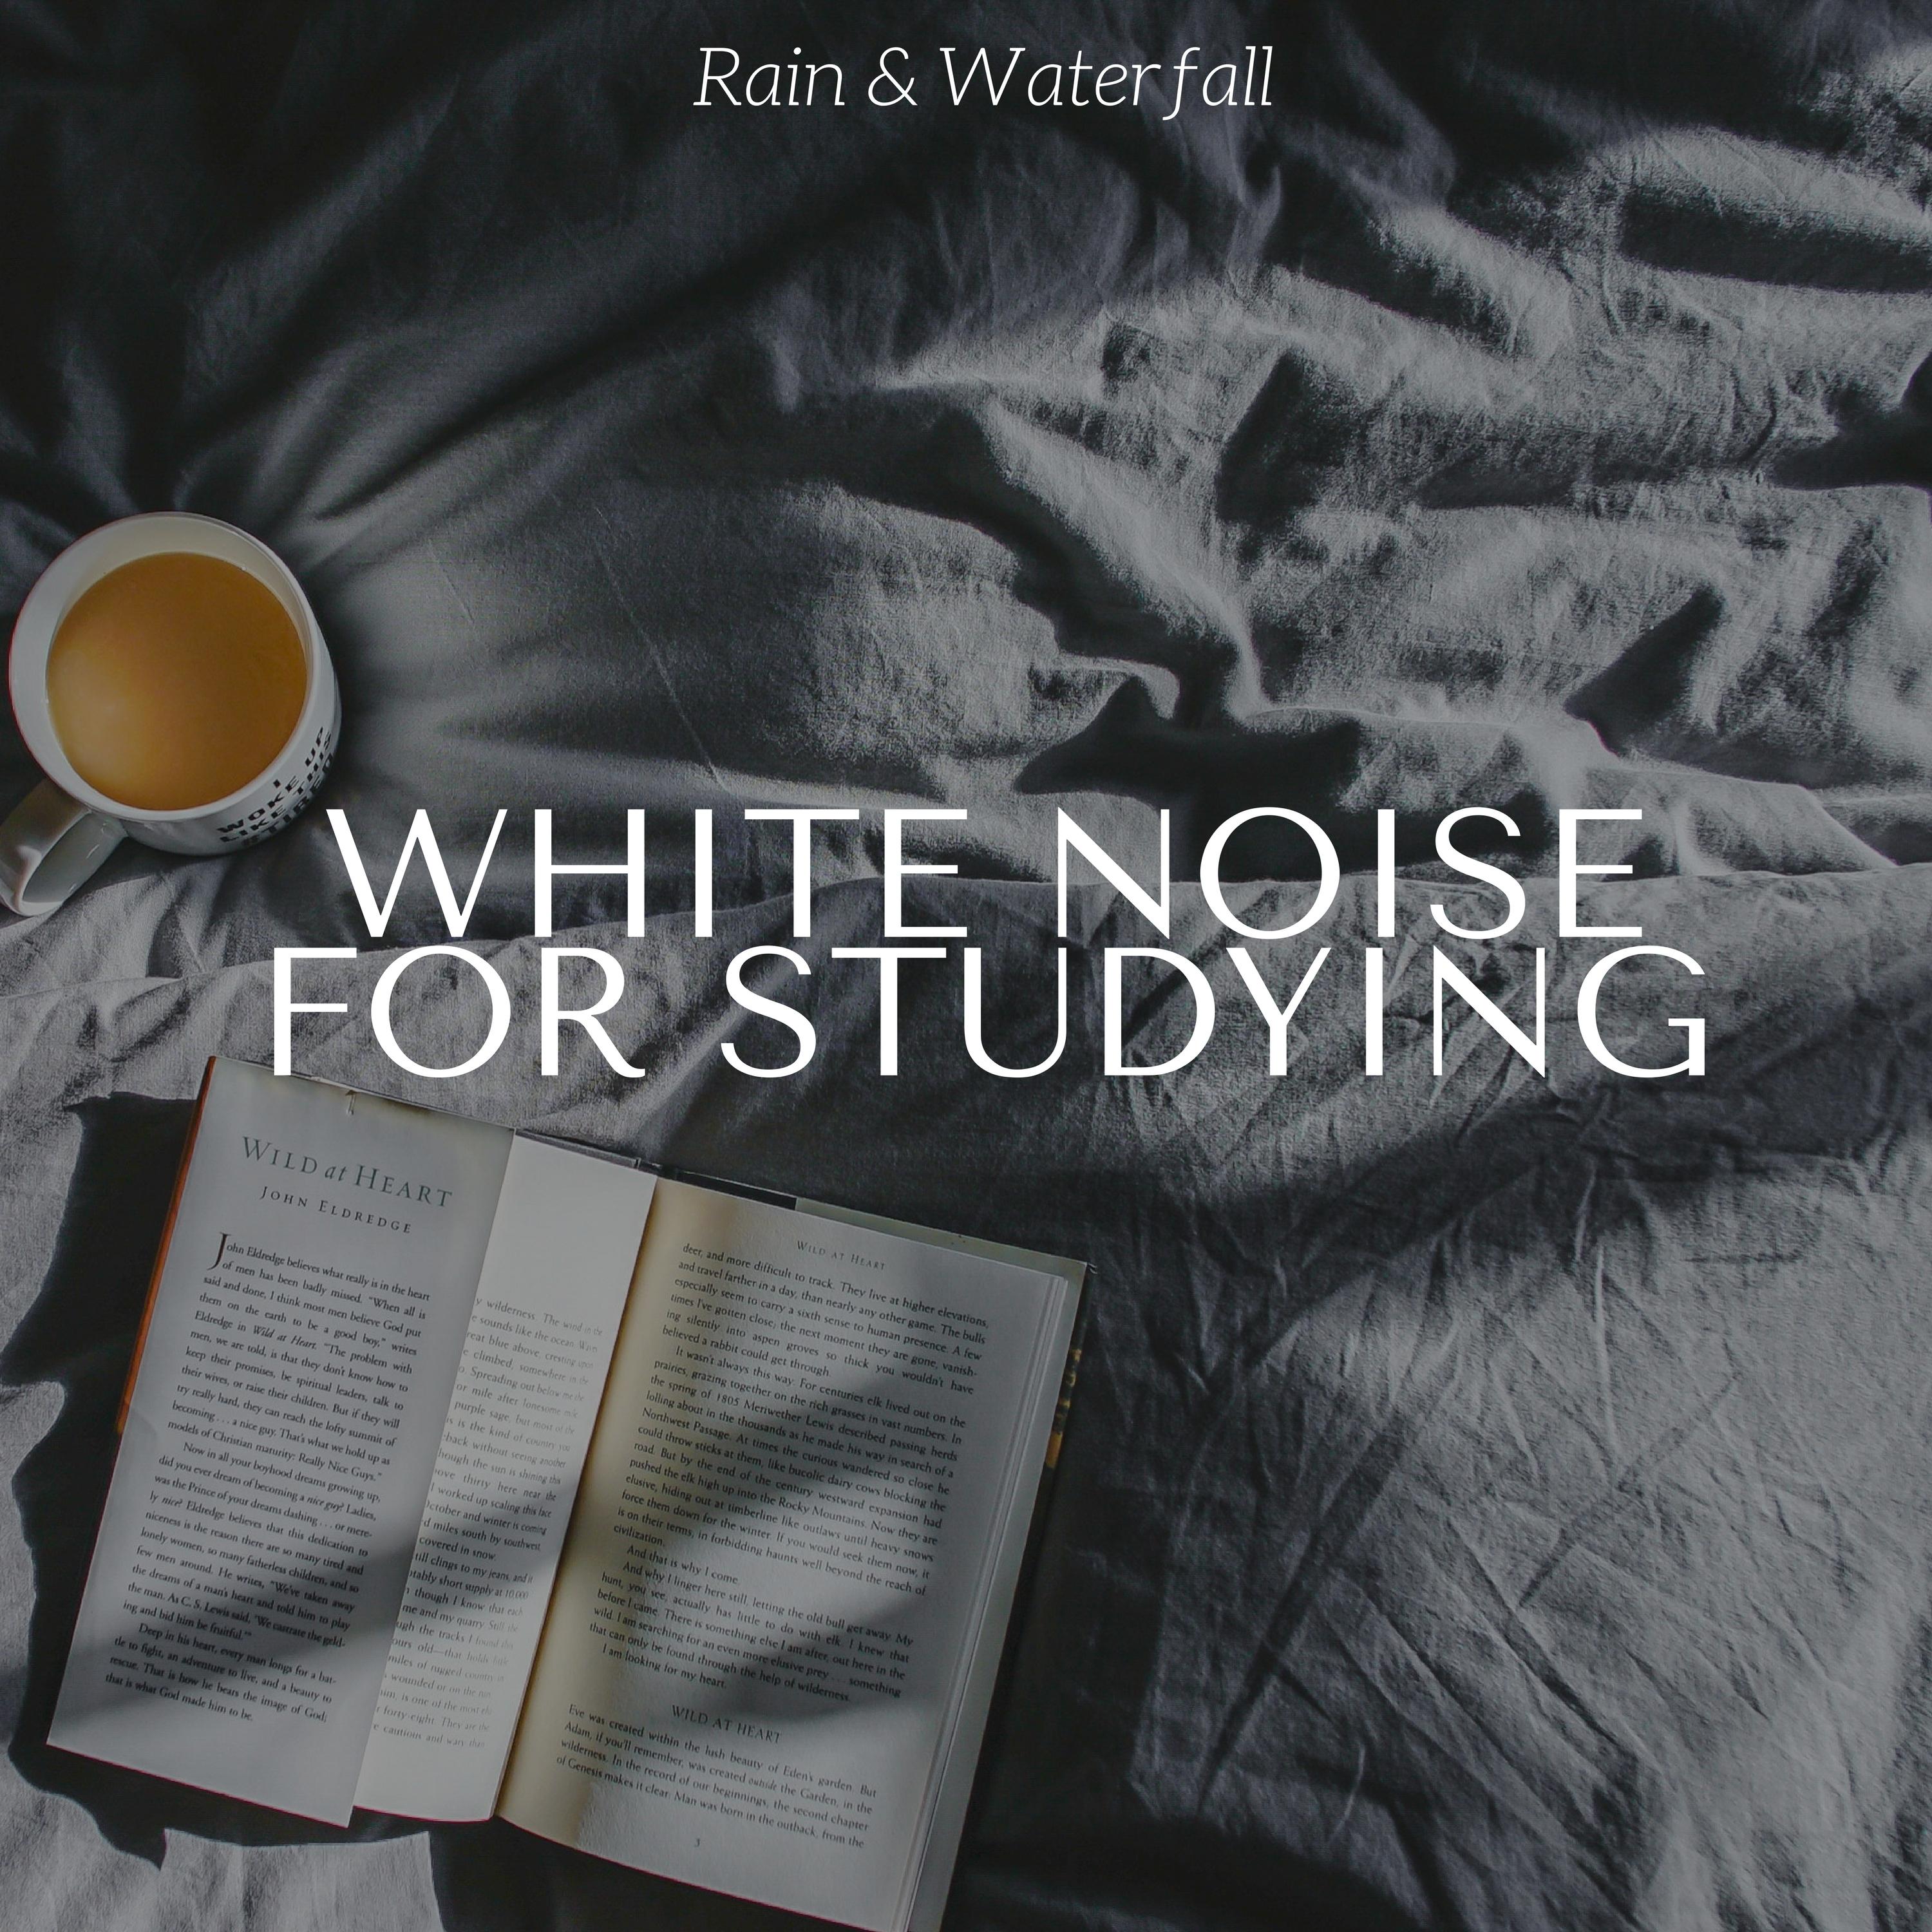 White Noise for Studying - Rain & Waterfall